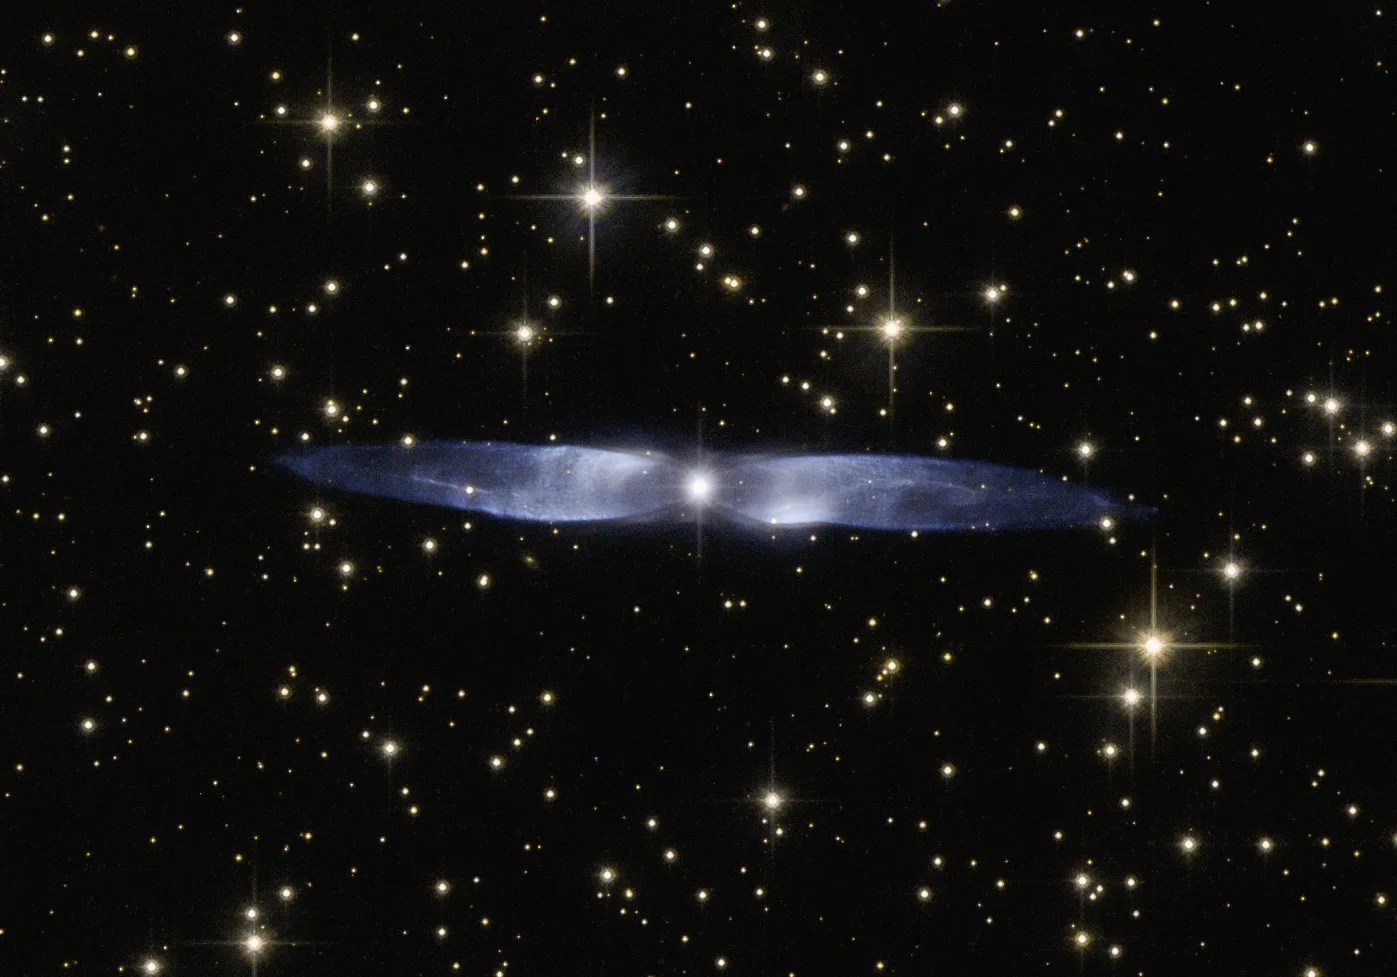 Bluish-purple "wings", very long and thing, stream out either side of a dying star. Other stars are visible in the background.